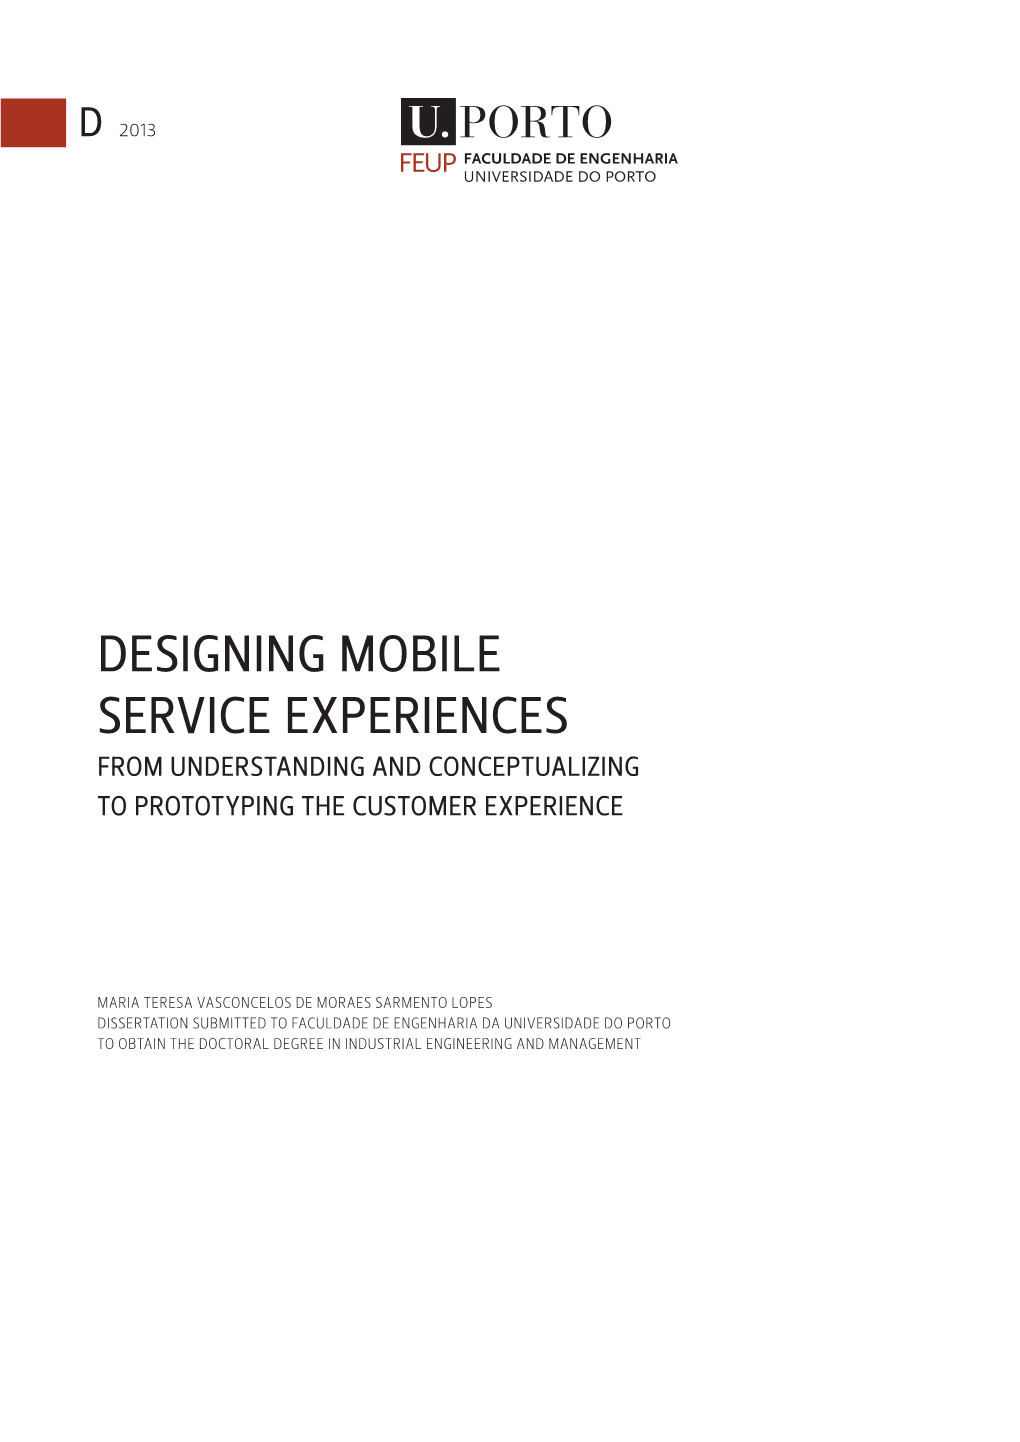 Designing Mobile Service Experiences from Understanding and Conceptualizing to Prototyping the Customer Experience